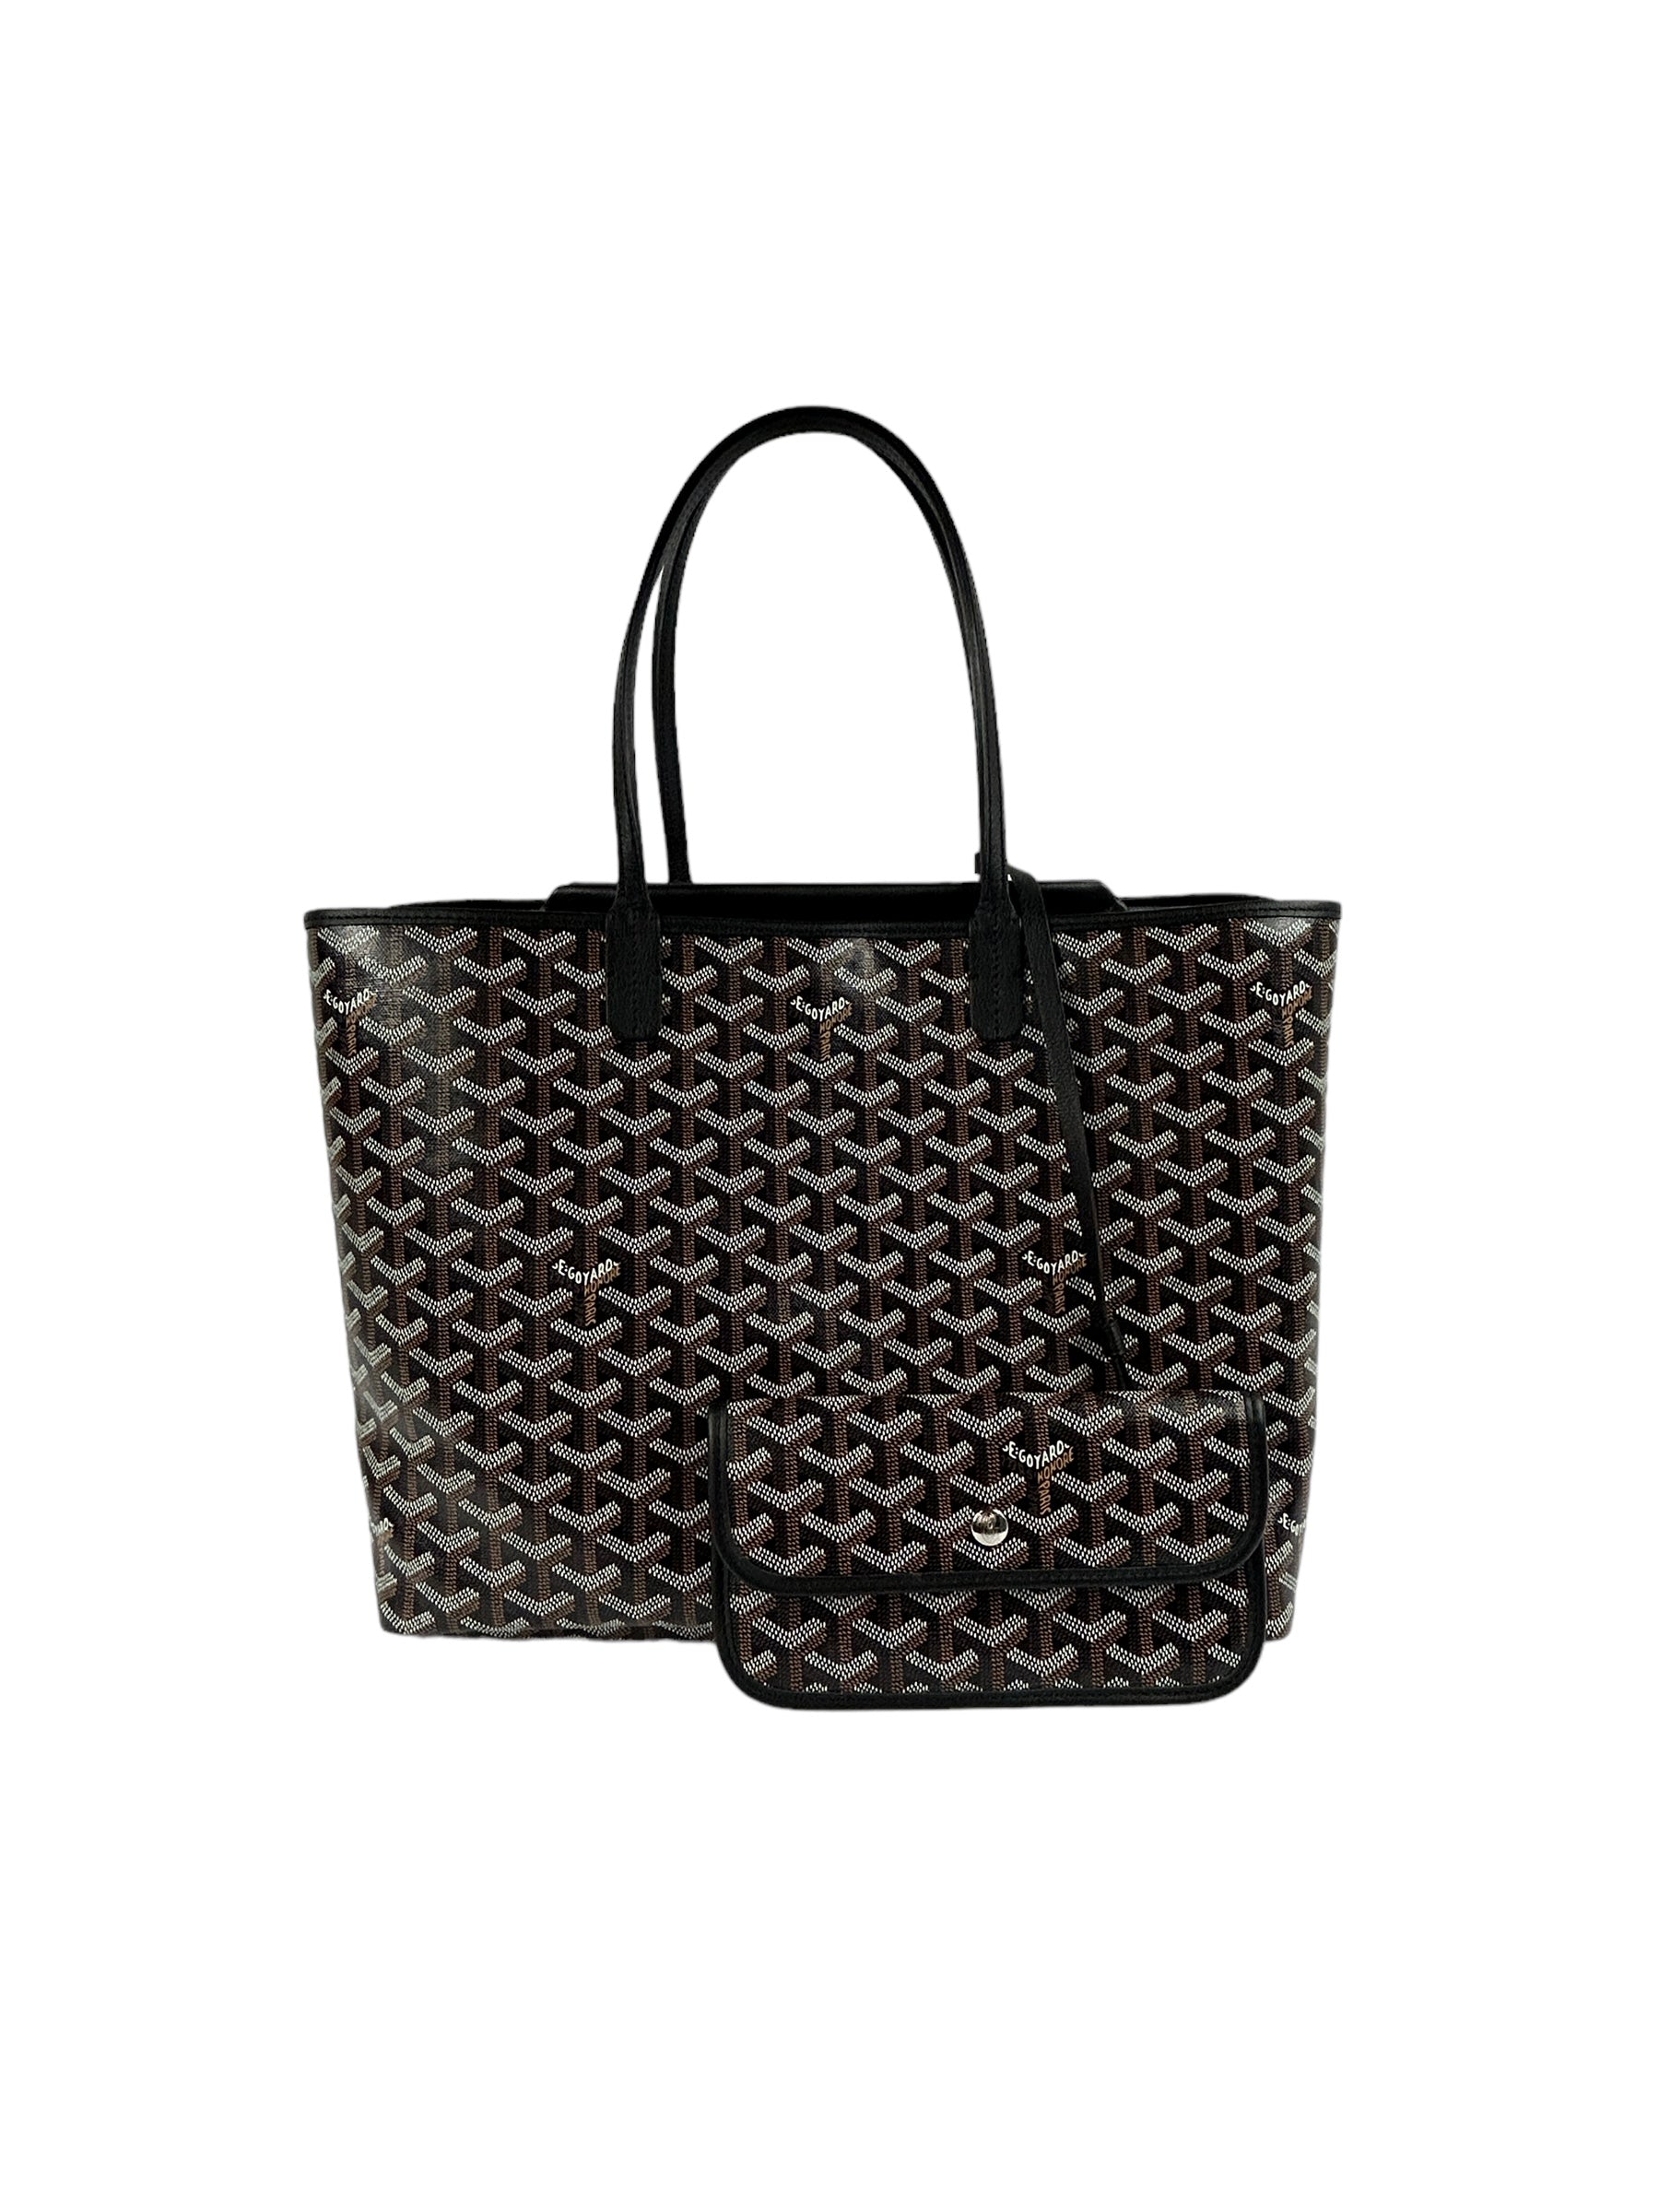 Black/Tan Goyardine Coated Canvas and Chevroches Calfskin Leather Isabelle PM Tote Bag w/SHW